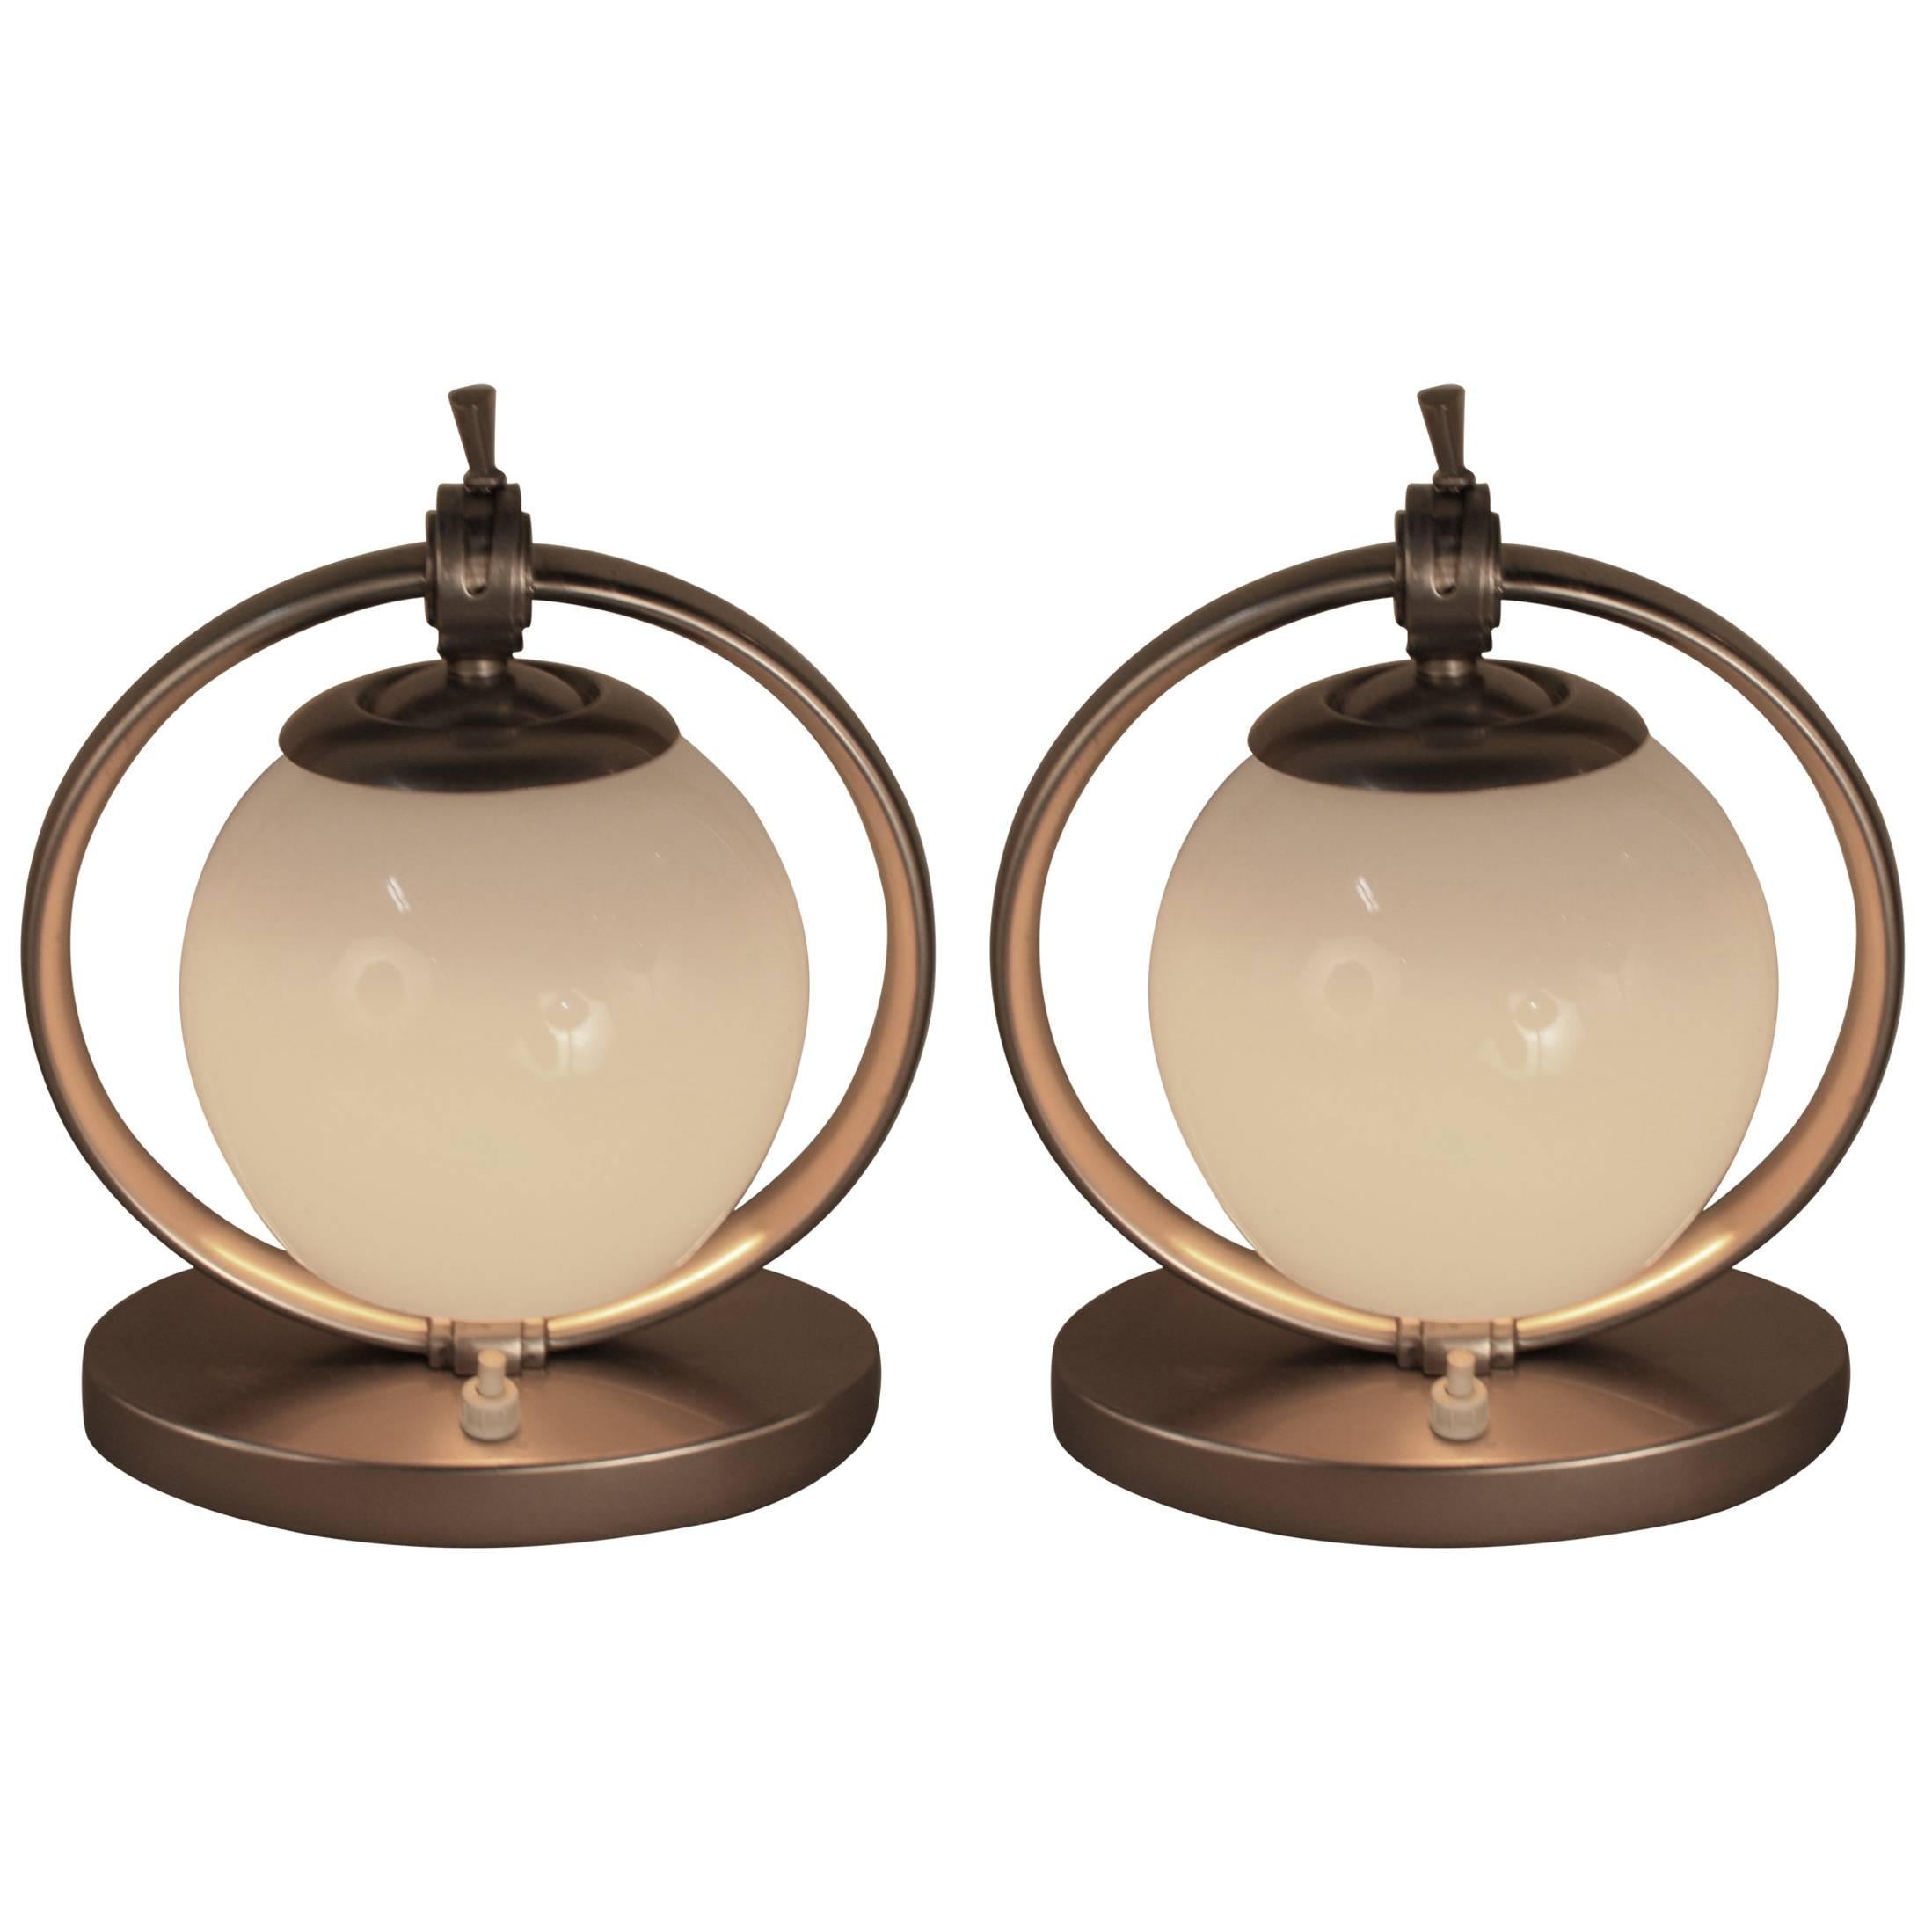 Pair of Mid-Century Modern Table Lamps by W F M